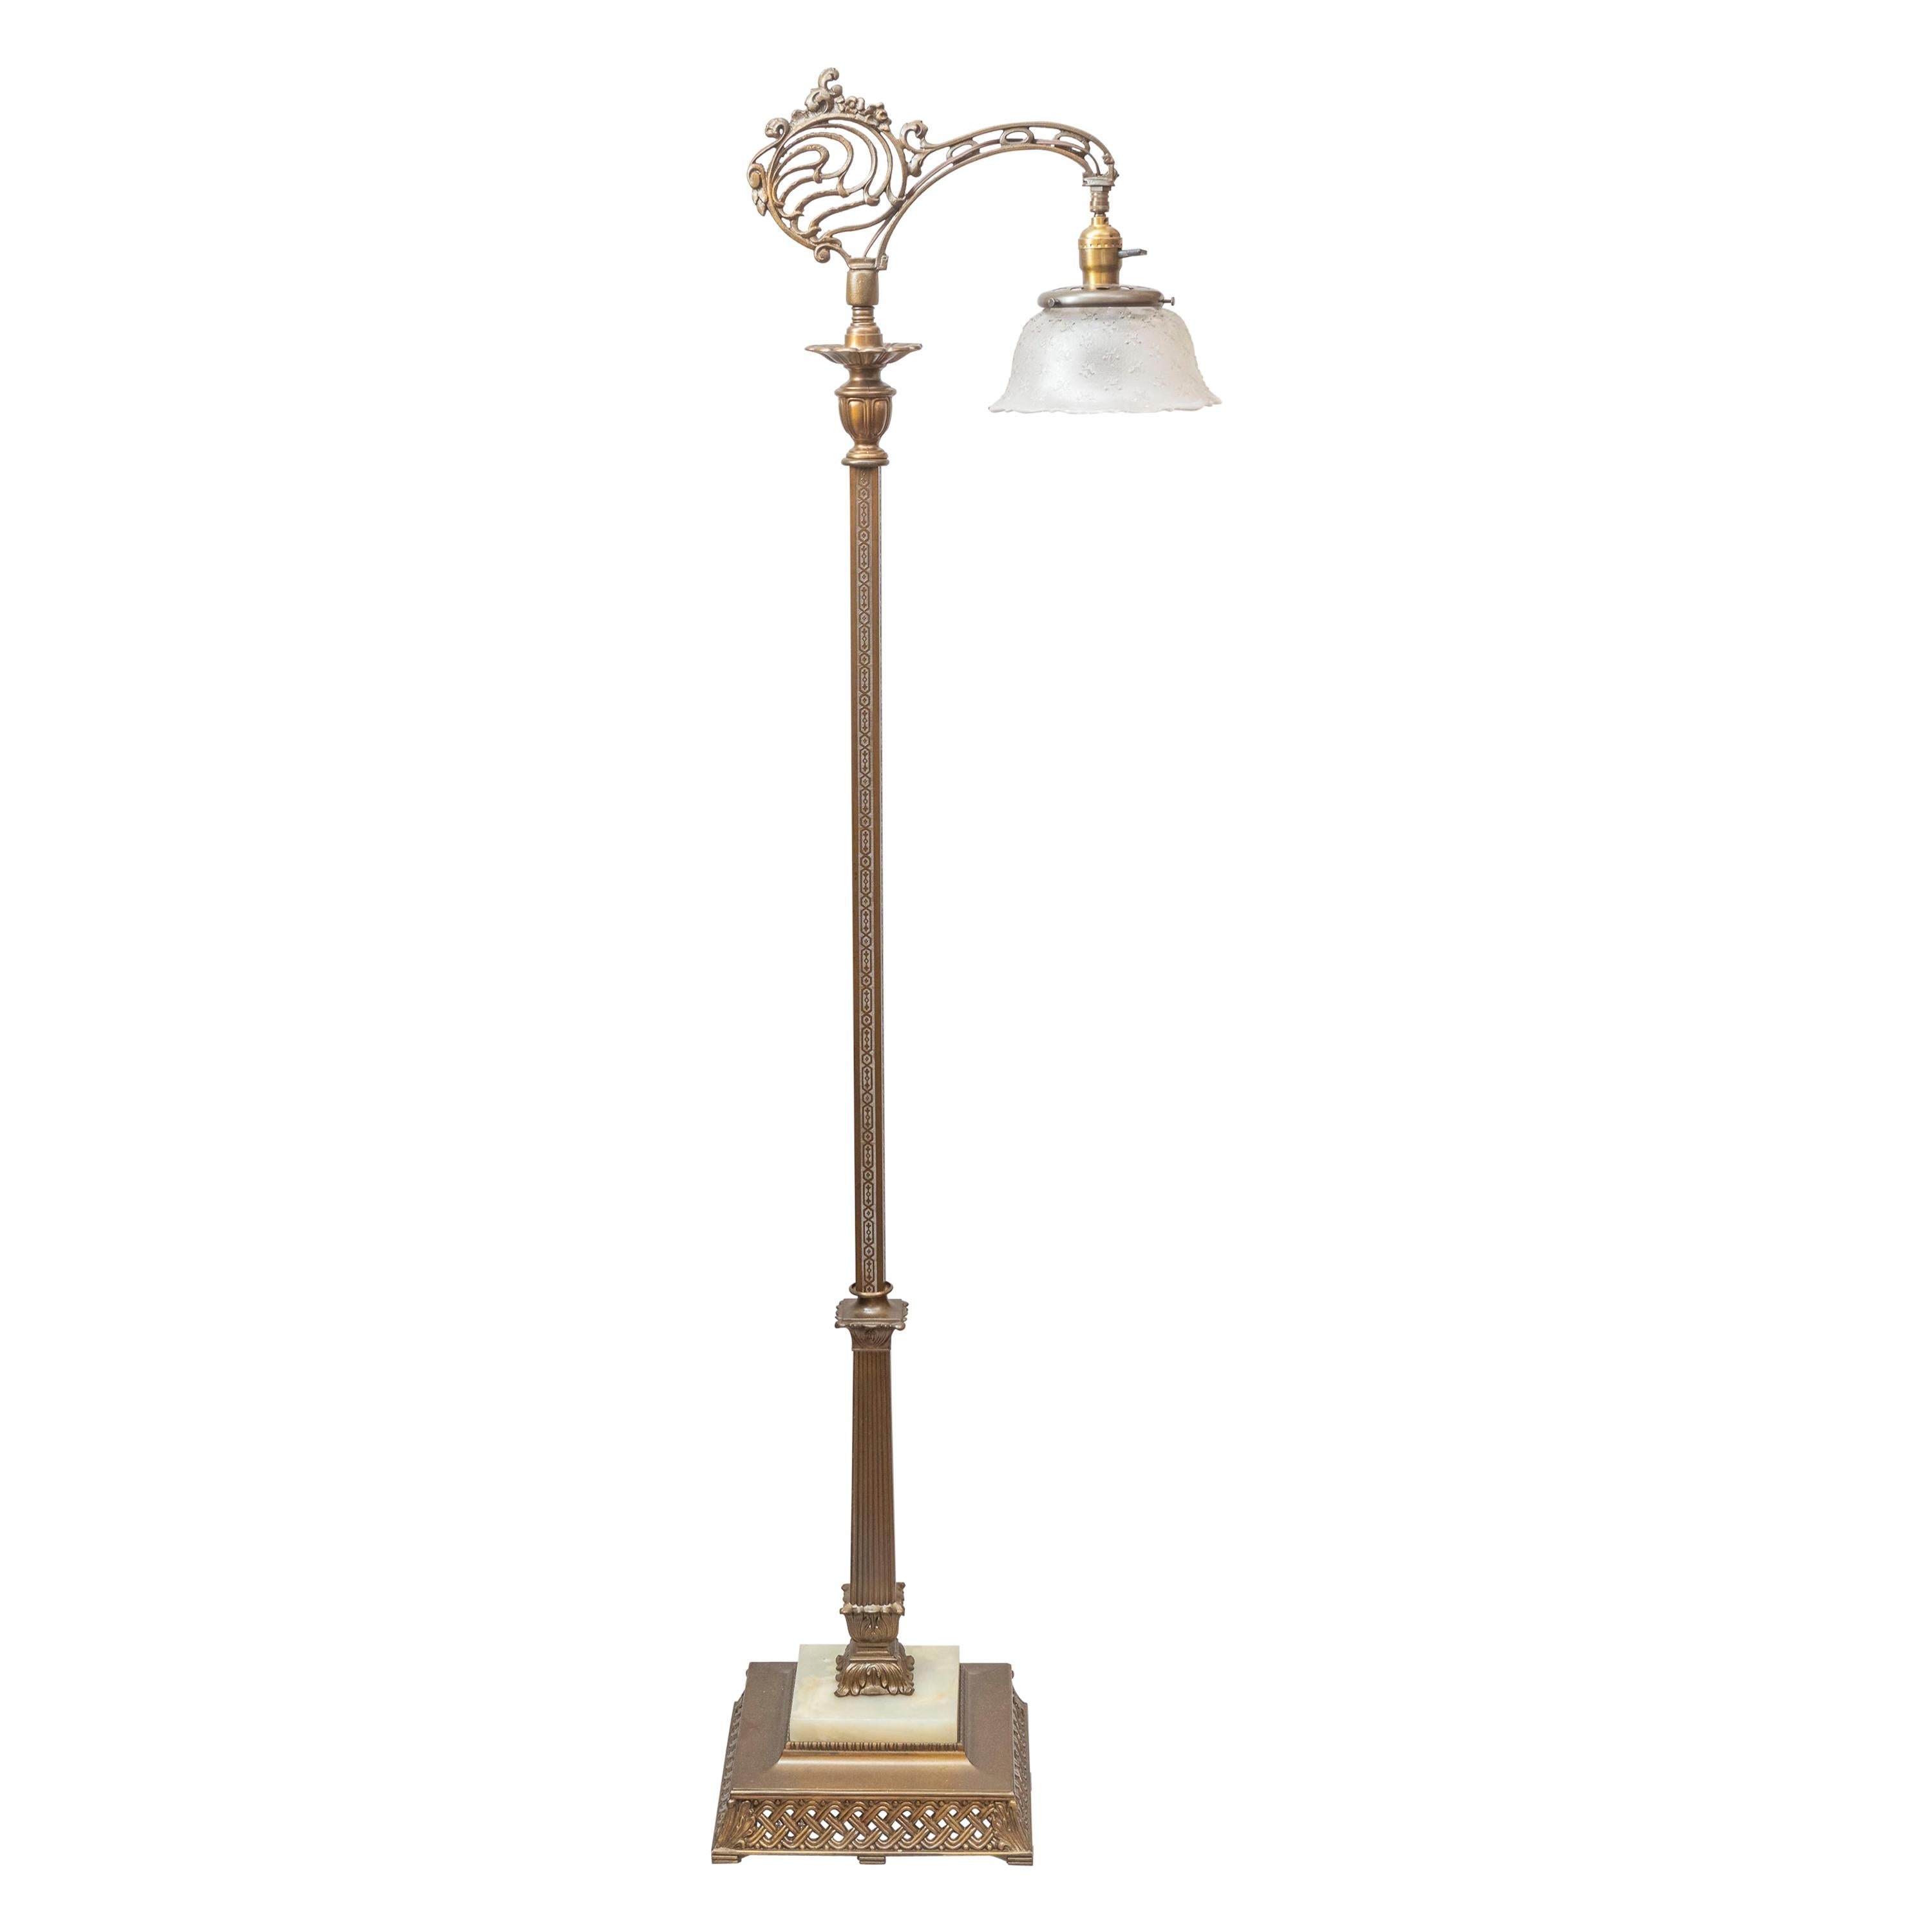 Antique Floor Lamp, Bridge Style with Period Glass Shade